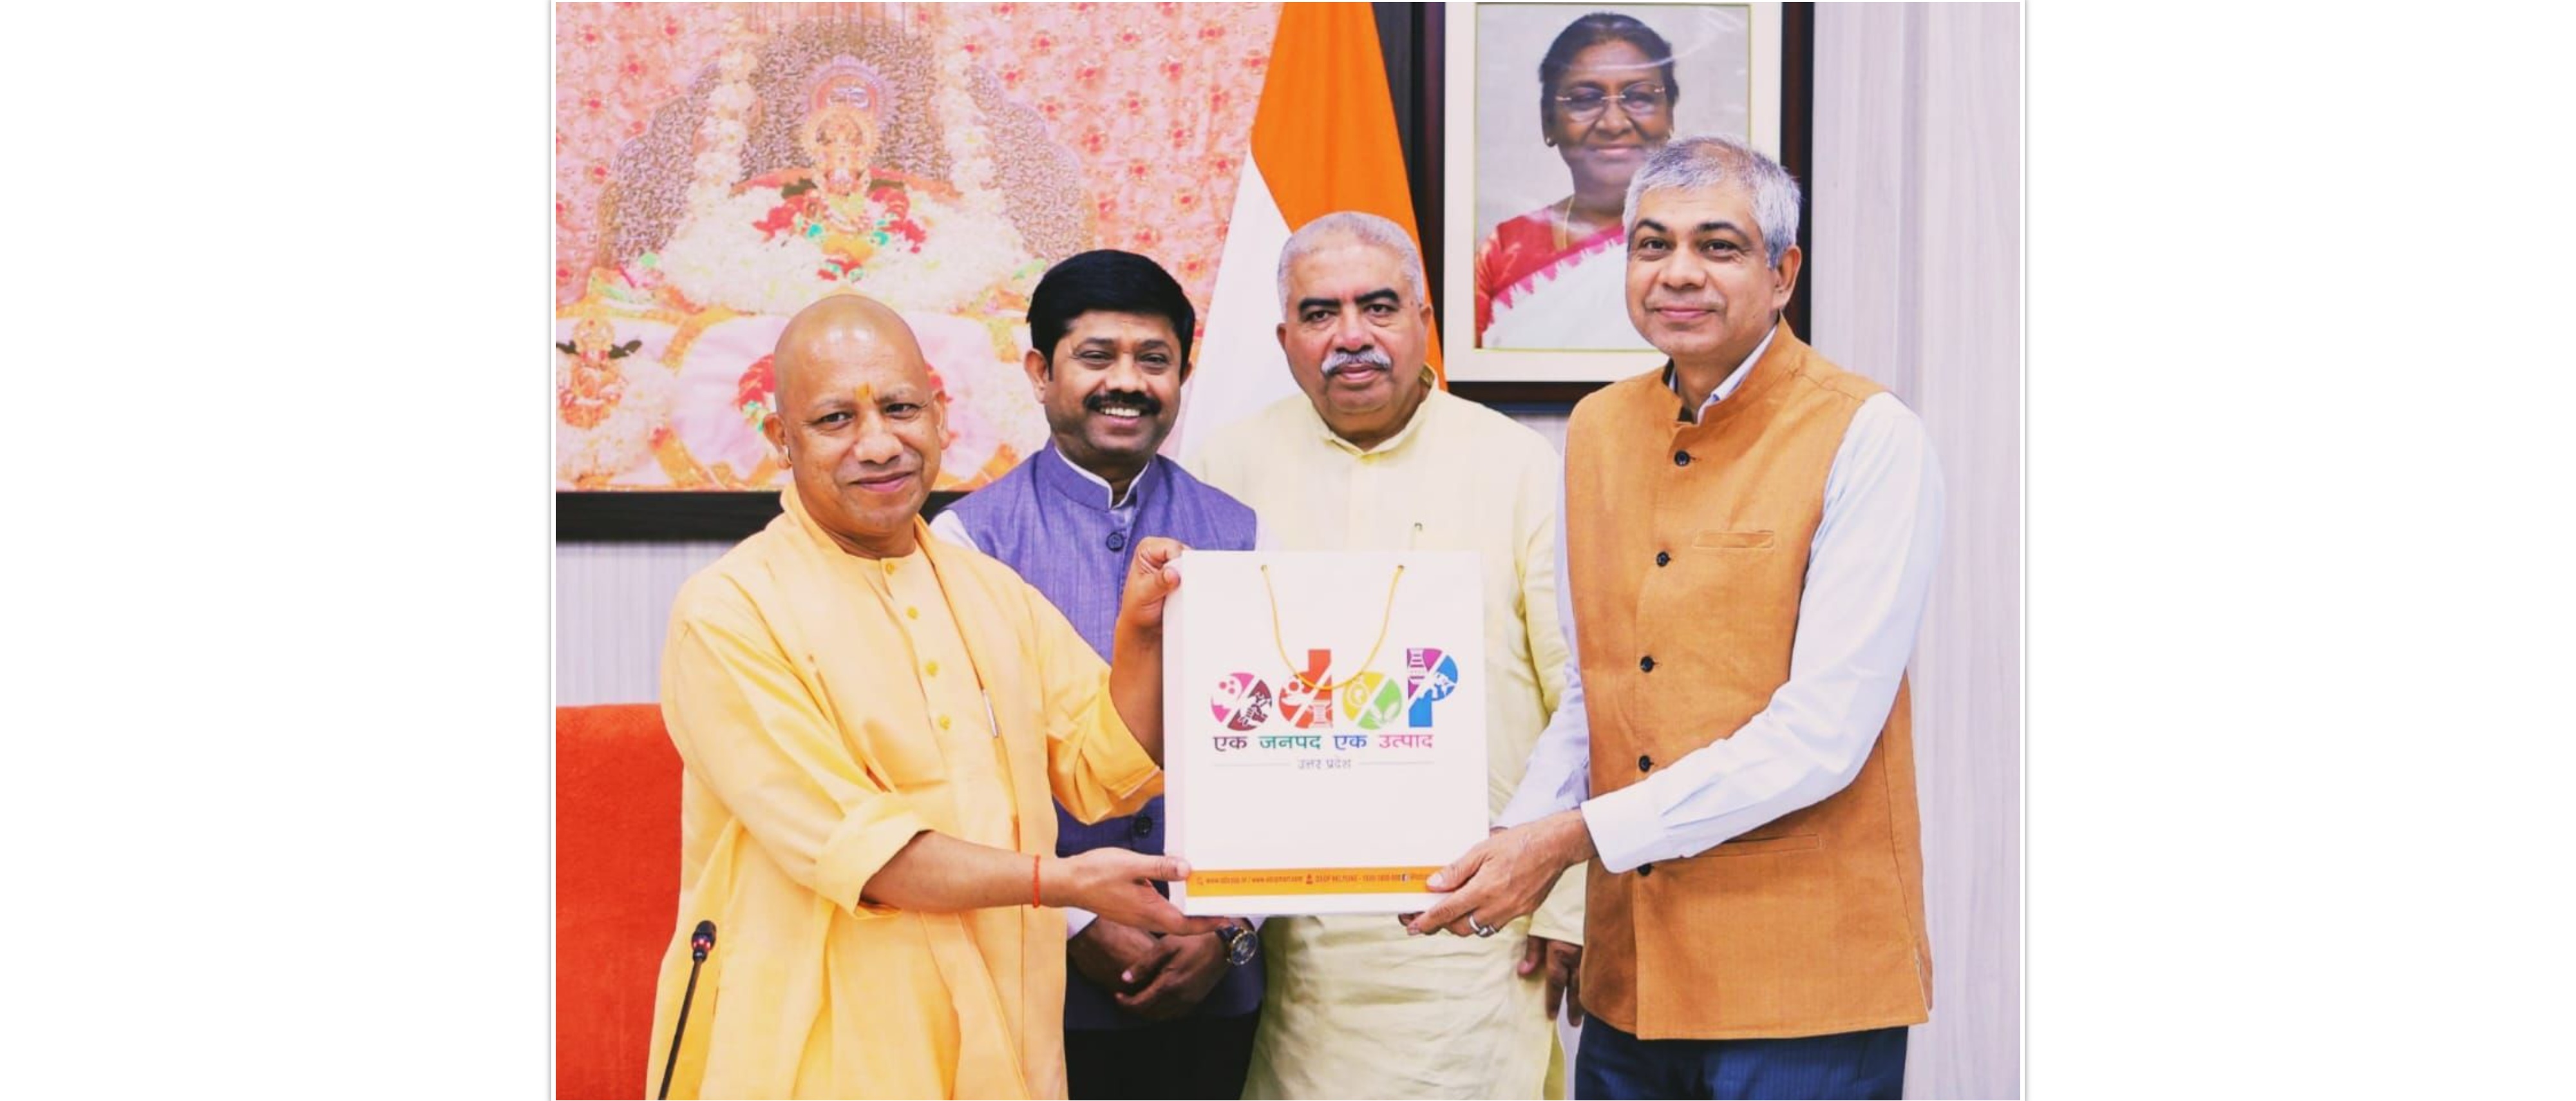  <div style="fcolor: #fff; font-weight: 600; font-size: 1.5em;">
<p style="font-size: 13.8px;">Hon'ble Chief Minister of State of Uttar Pradesh, Shri Yogi Adityanath, received Ambassador Pankaj Sharma at his residence in Lucknow on 17th October. 

They discussed furthering cooperation between México & Uttar Pradesh especially in the fields of education, skill development, agriculture & tourism.
<br /><span style="text-align: center;">16 October 2022</span></p>
</div>